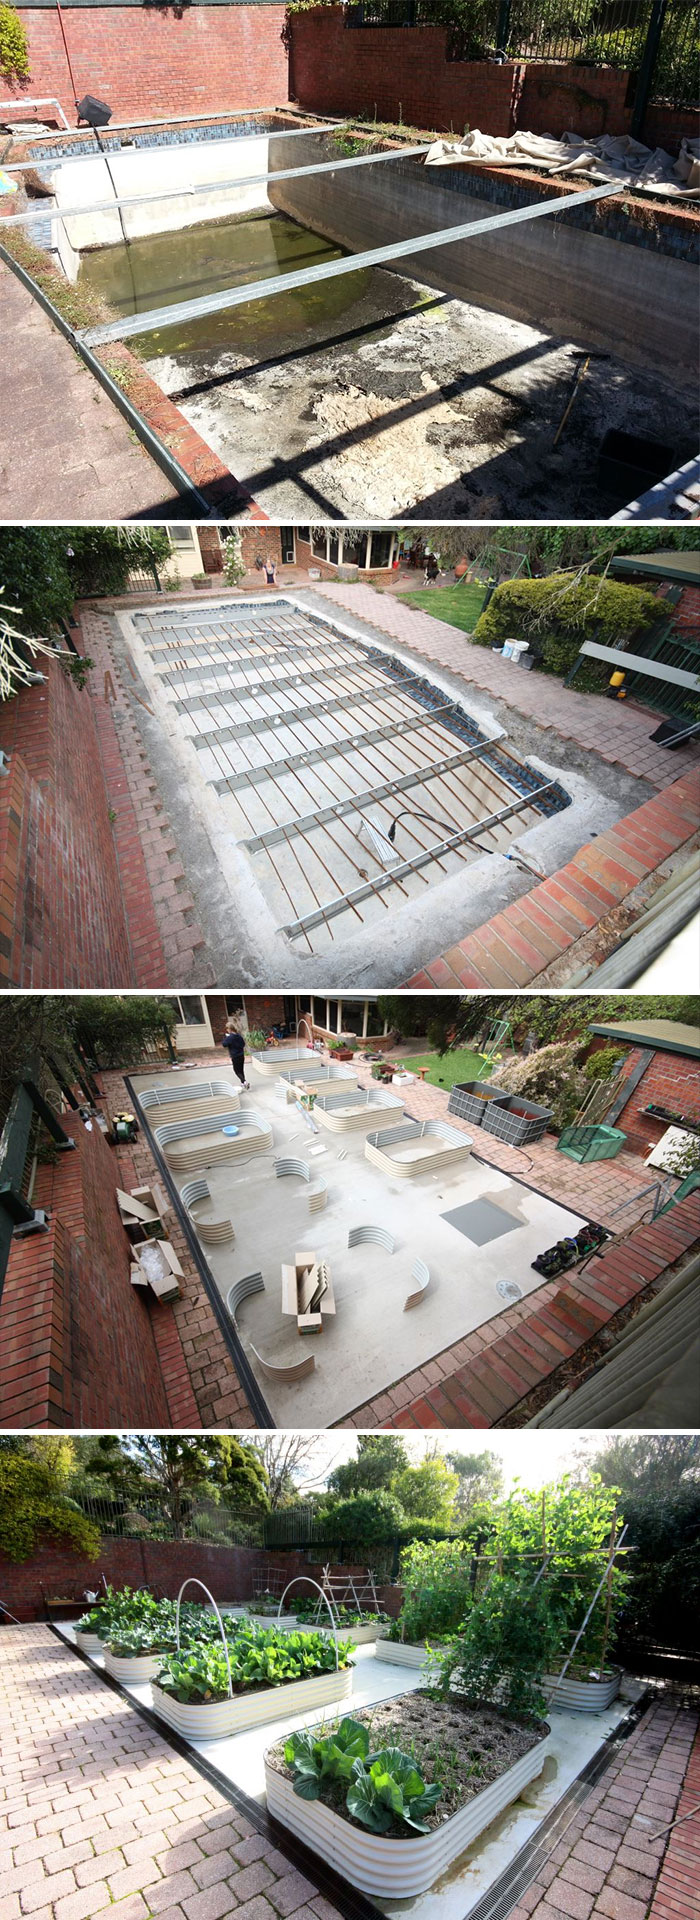 We've Converted Our Pool Into An 80,000l Underground Rainwater Tank With Raised Vegetable Garden Beds On Top